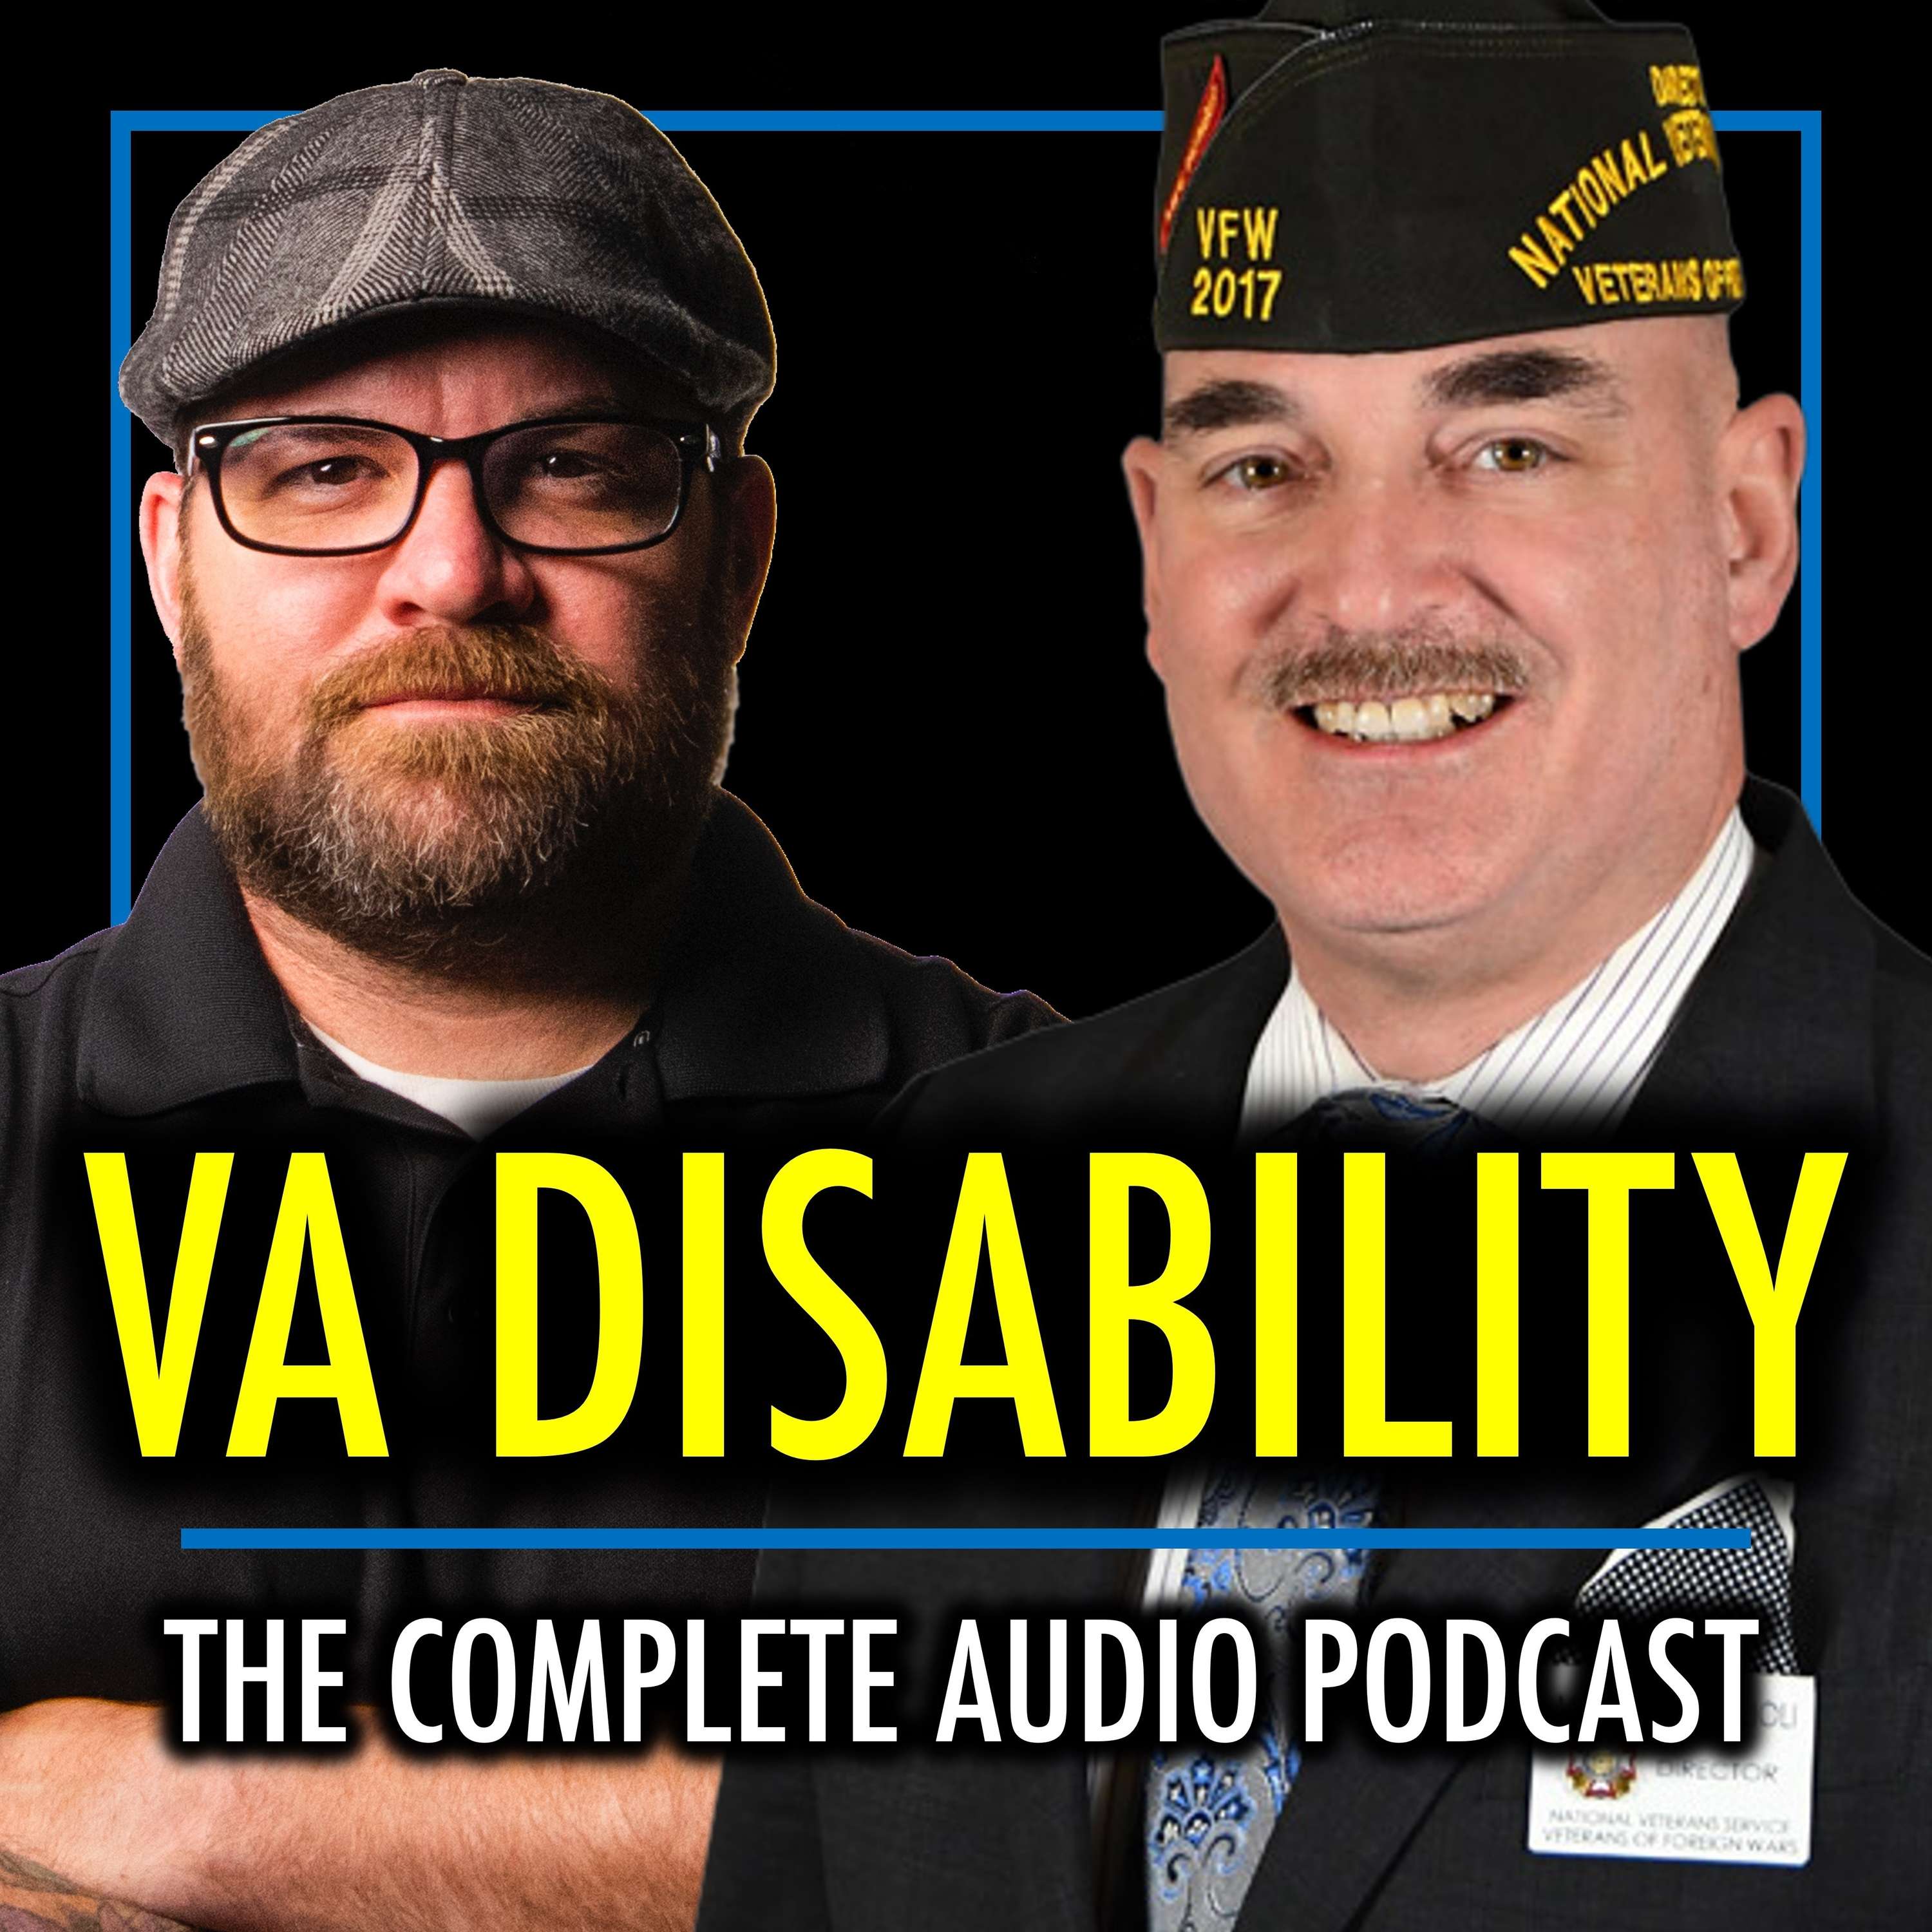 VA Disability - with Mike Figlioli, VFW Director of National Veterans Services